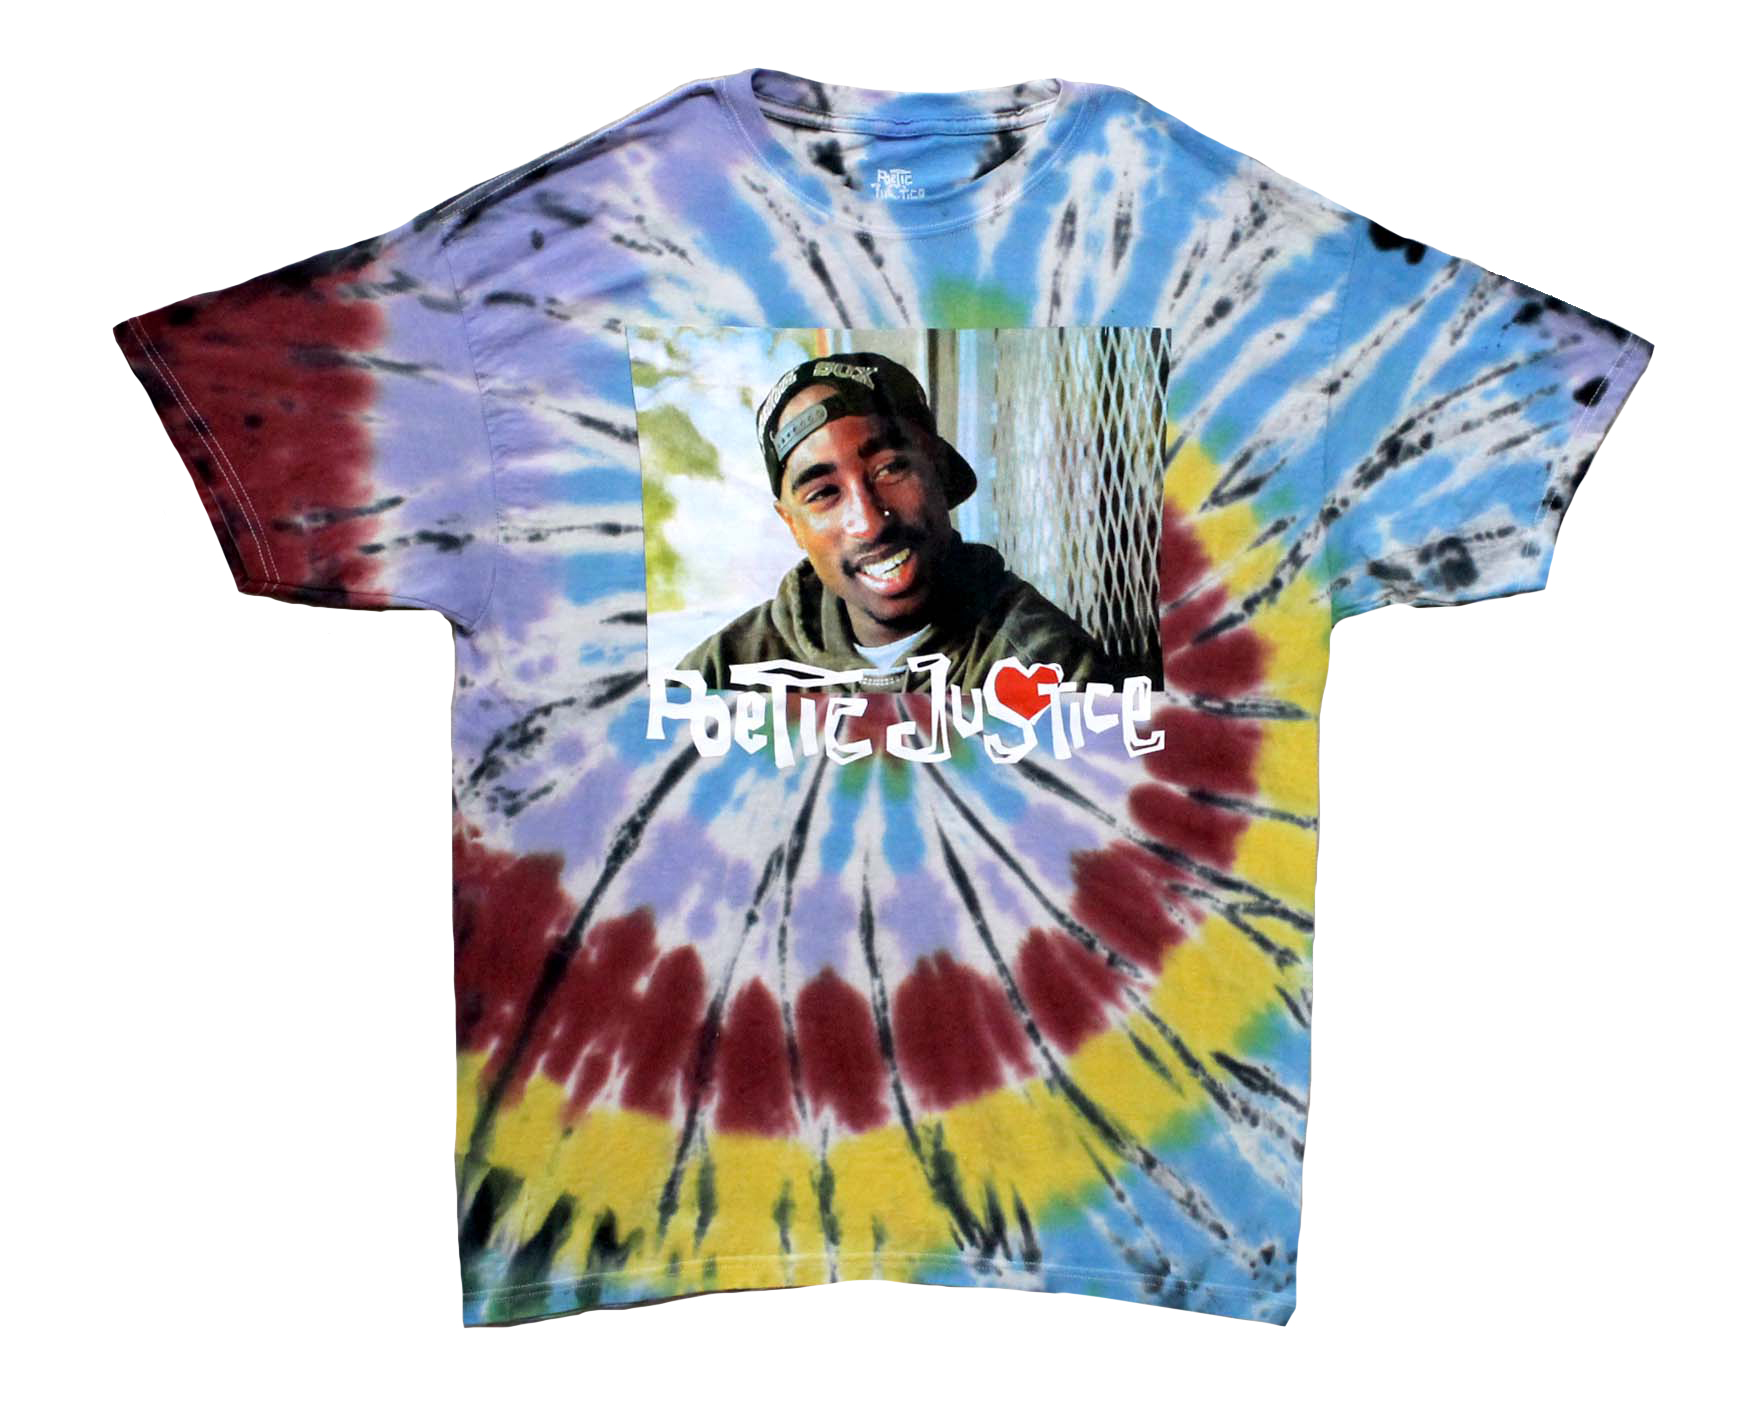 Tupac Poetic Justice T-Shirt Large White *O*